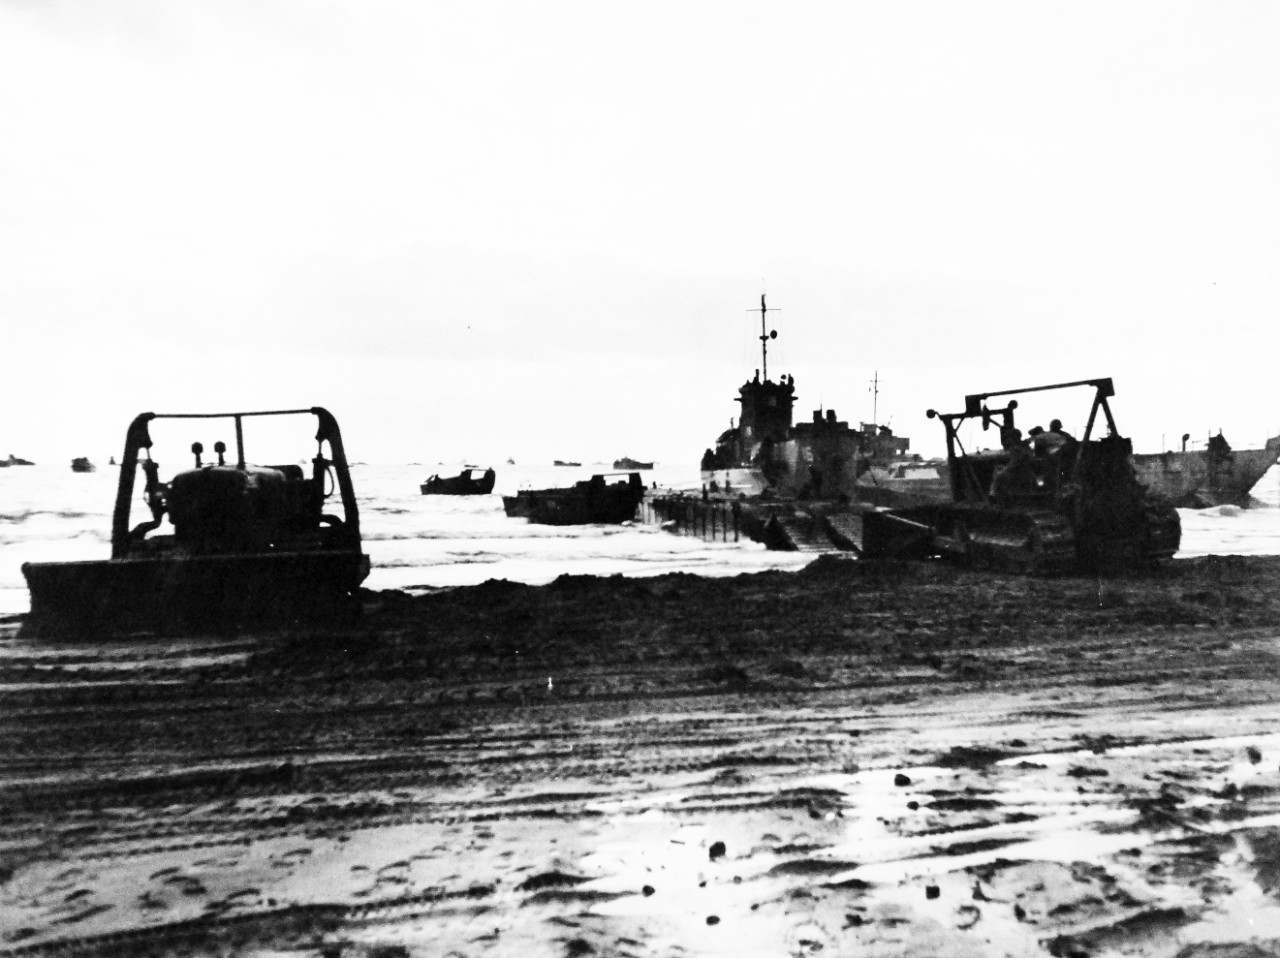 80-G-54406:   Battle of Anzio, January-June 1944.     Pontoon causeway set up in the Anzio-Nettuno area, Italy, to debark the 5th Army troops from an LCI during the first landing operations which were practically unopposed.  Only small-arms fire met the invasion force.   Photograph released February 3, 1944.  U.S. Navy photograph, now in the collections of the National Archives.  (2016/06/28).